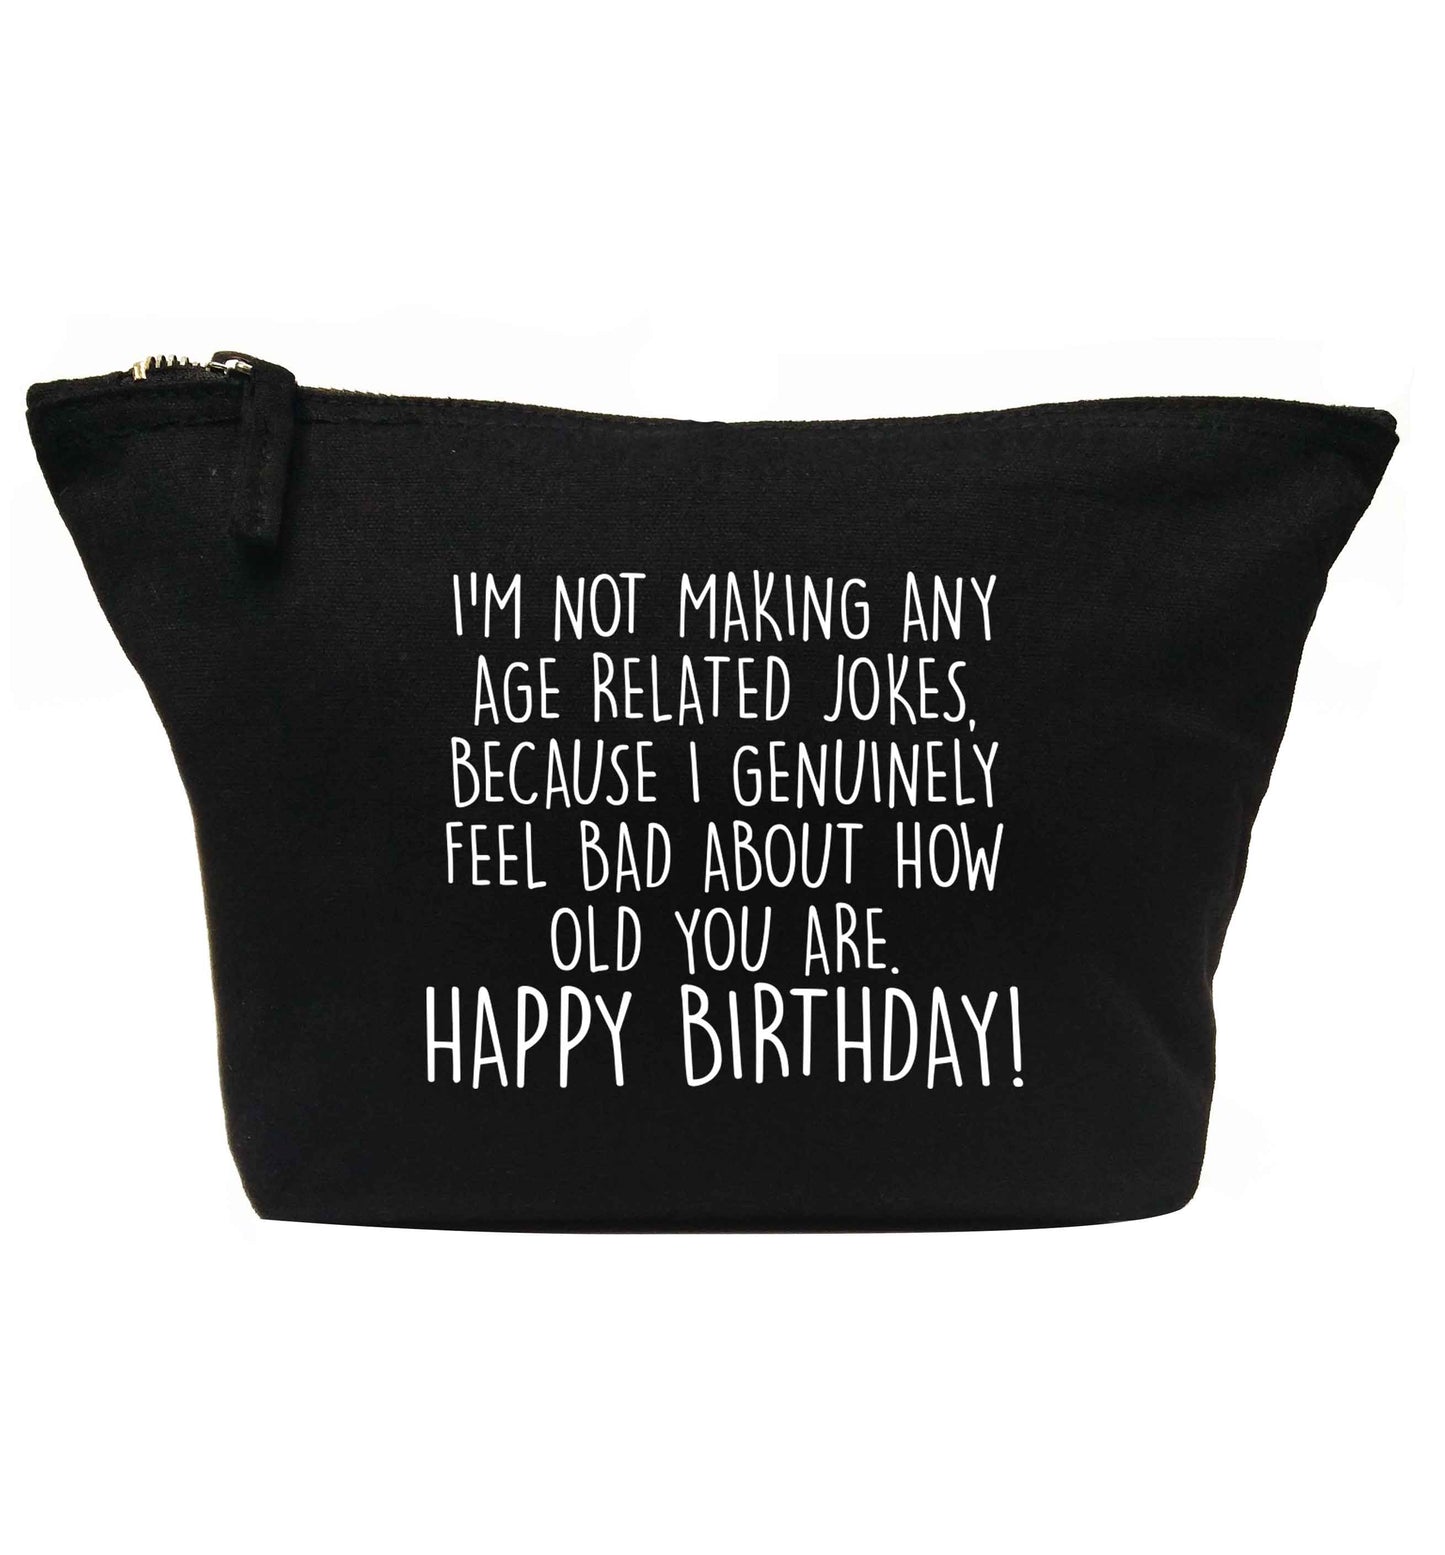 I'm not making any age related jokes because I genuinely feel bad for how old you are | Makeup / wash bag